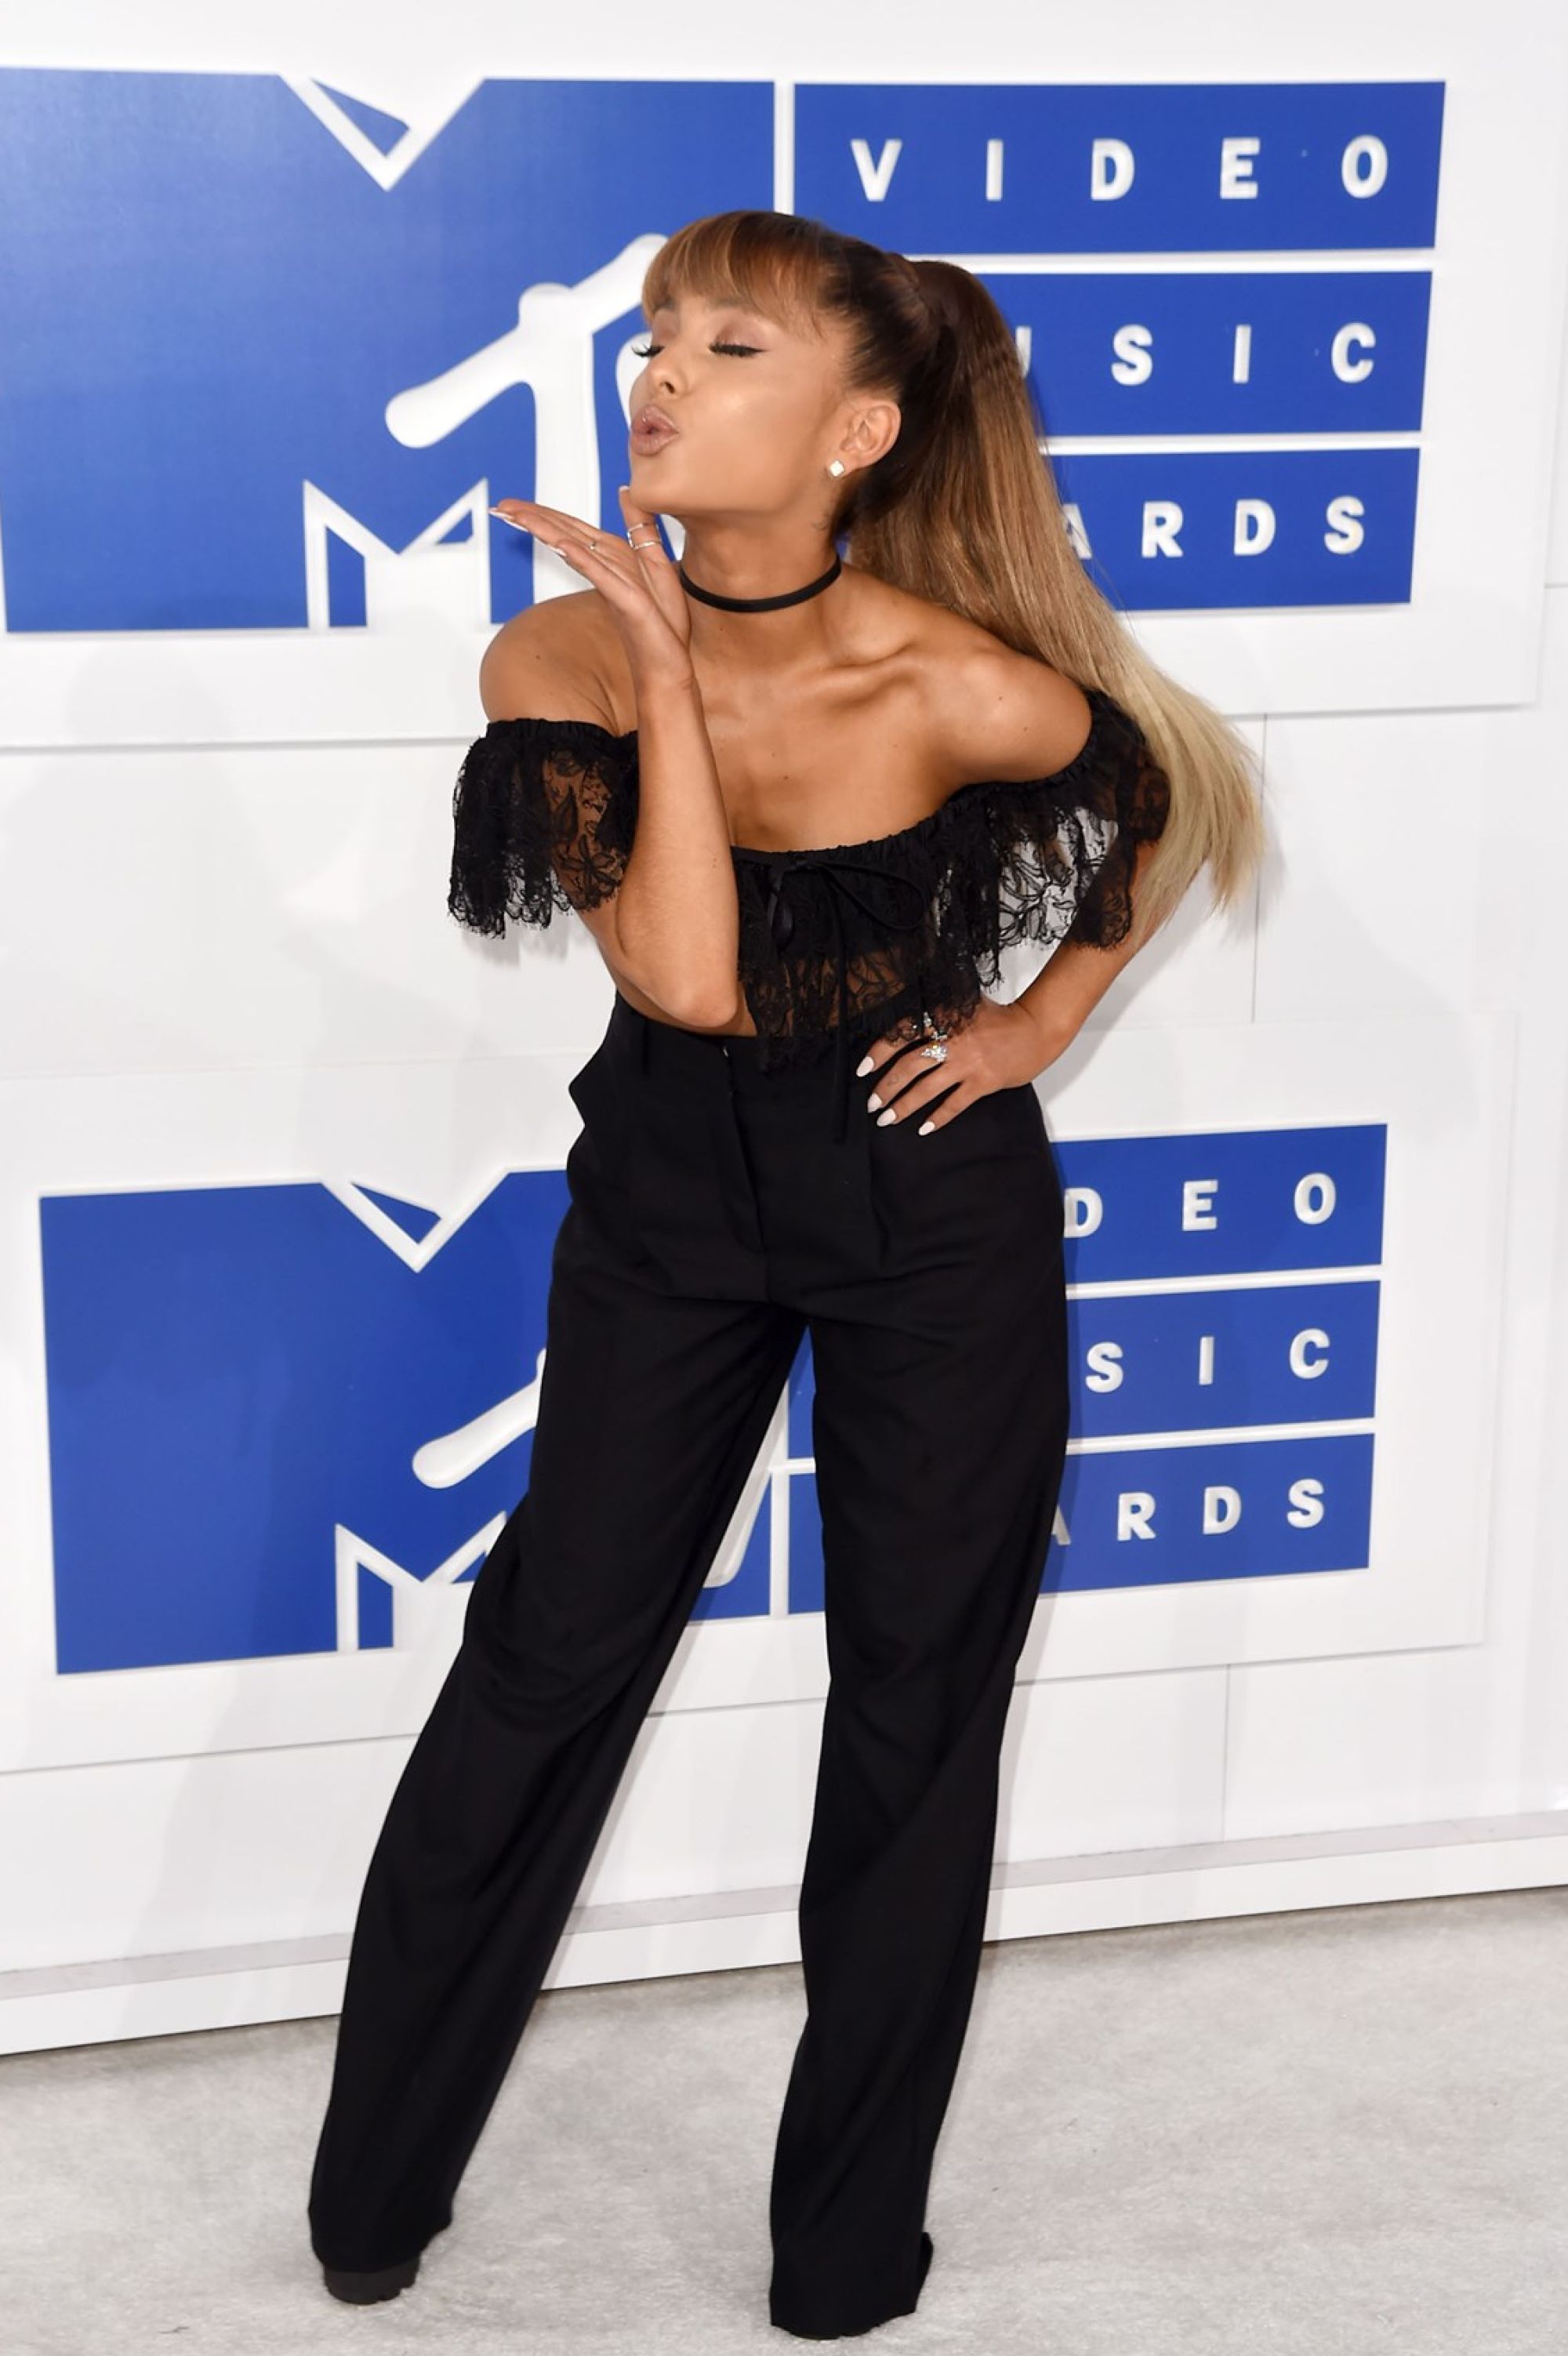 Ariana Grande Best Fashion Moments Over the Years – WWD